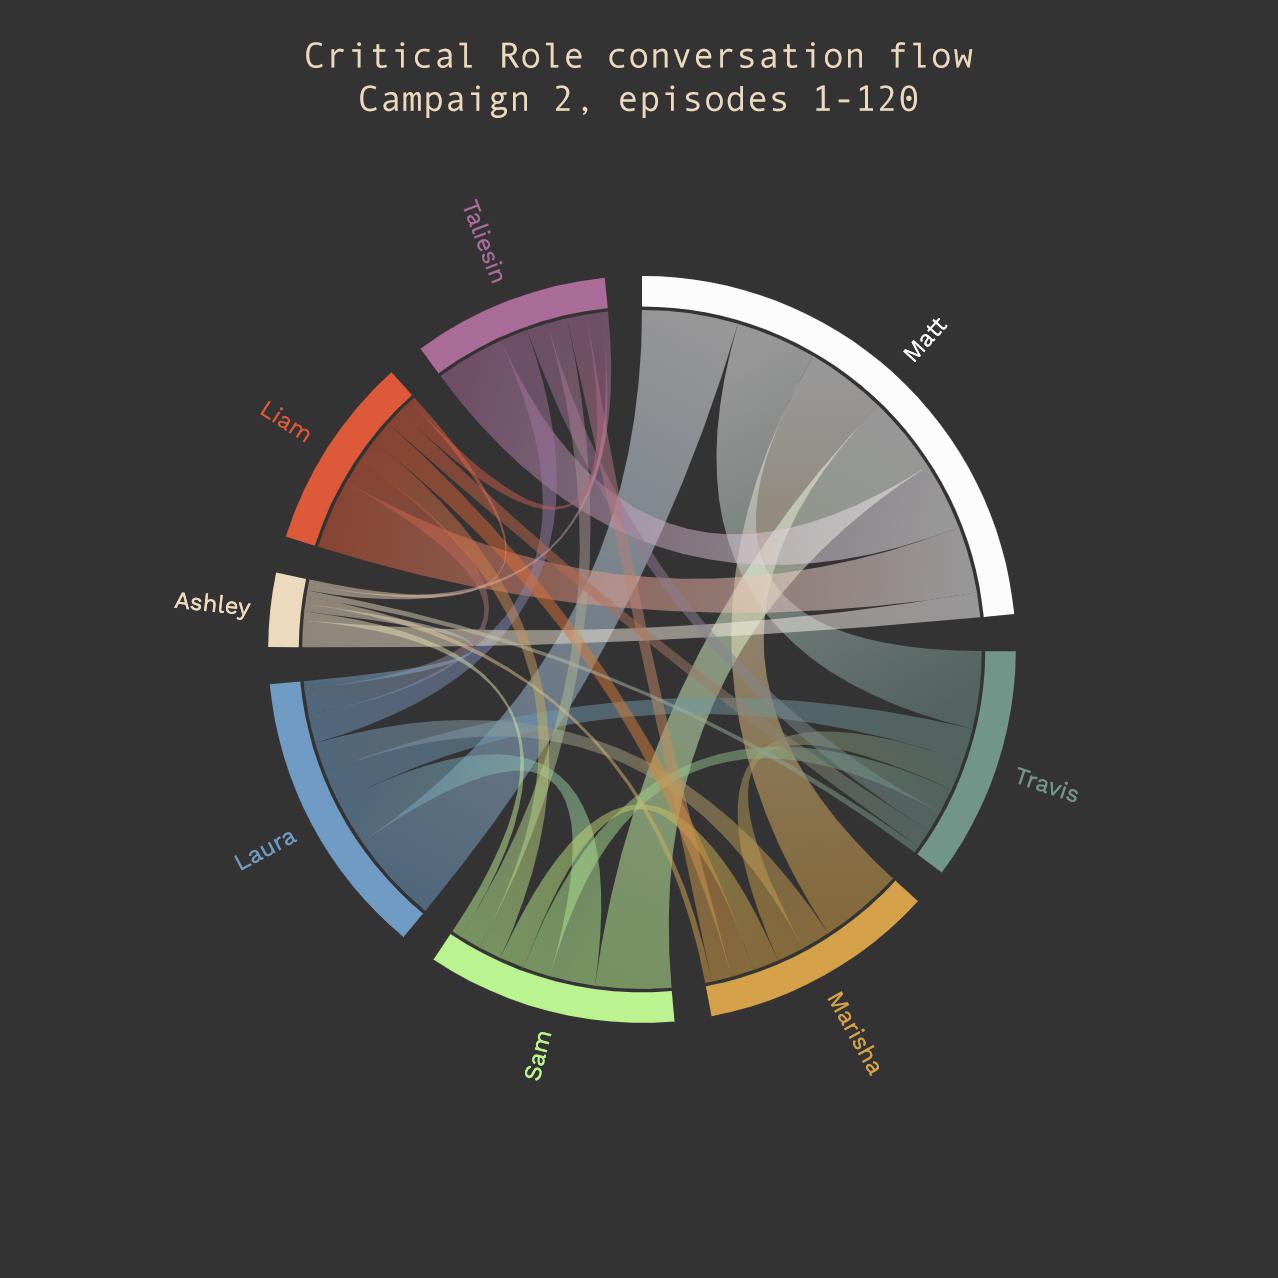 Chord diagram of conversation flow using episode transcripts from the popular DnD show Critical Role